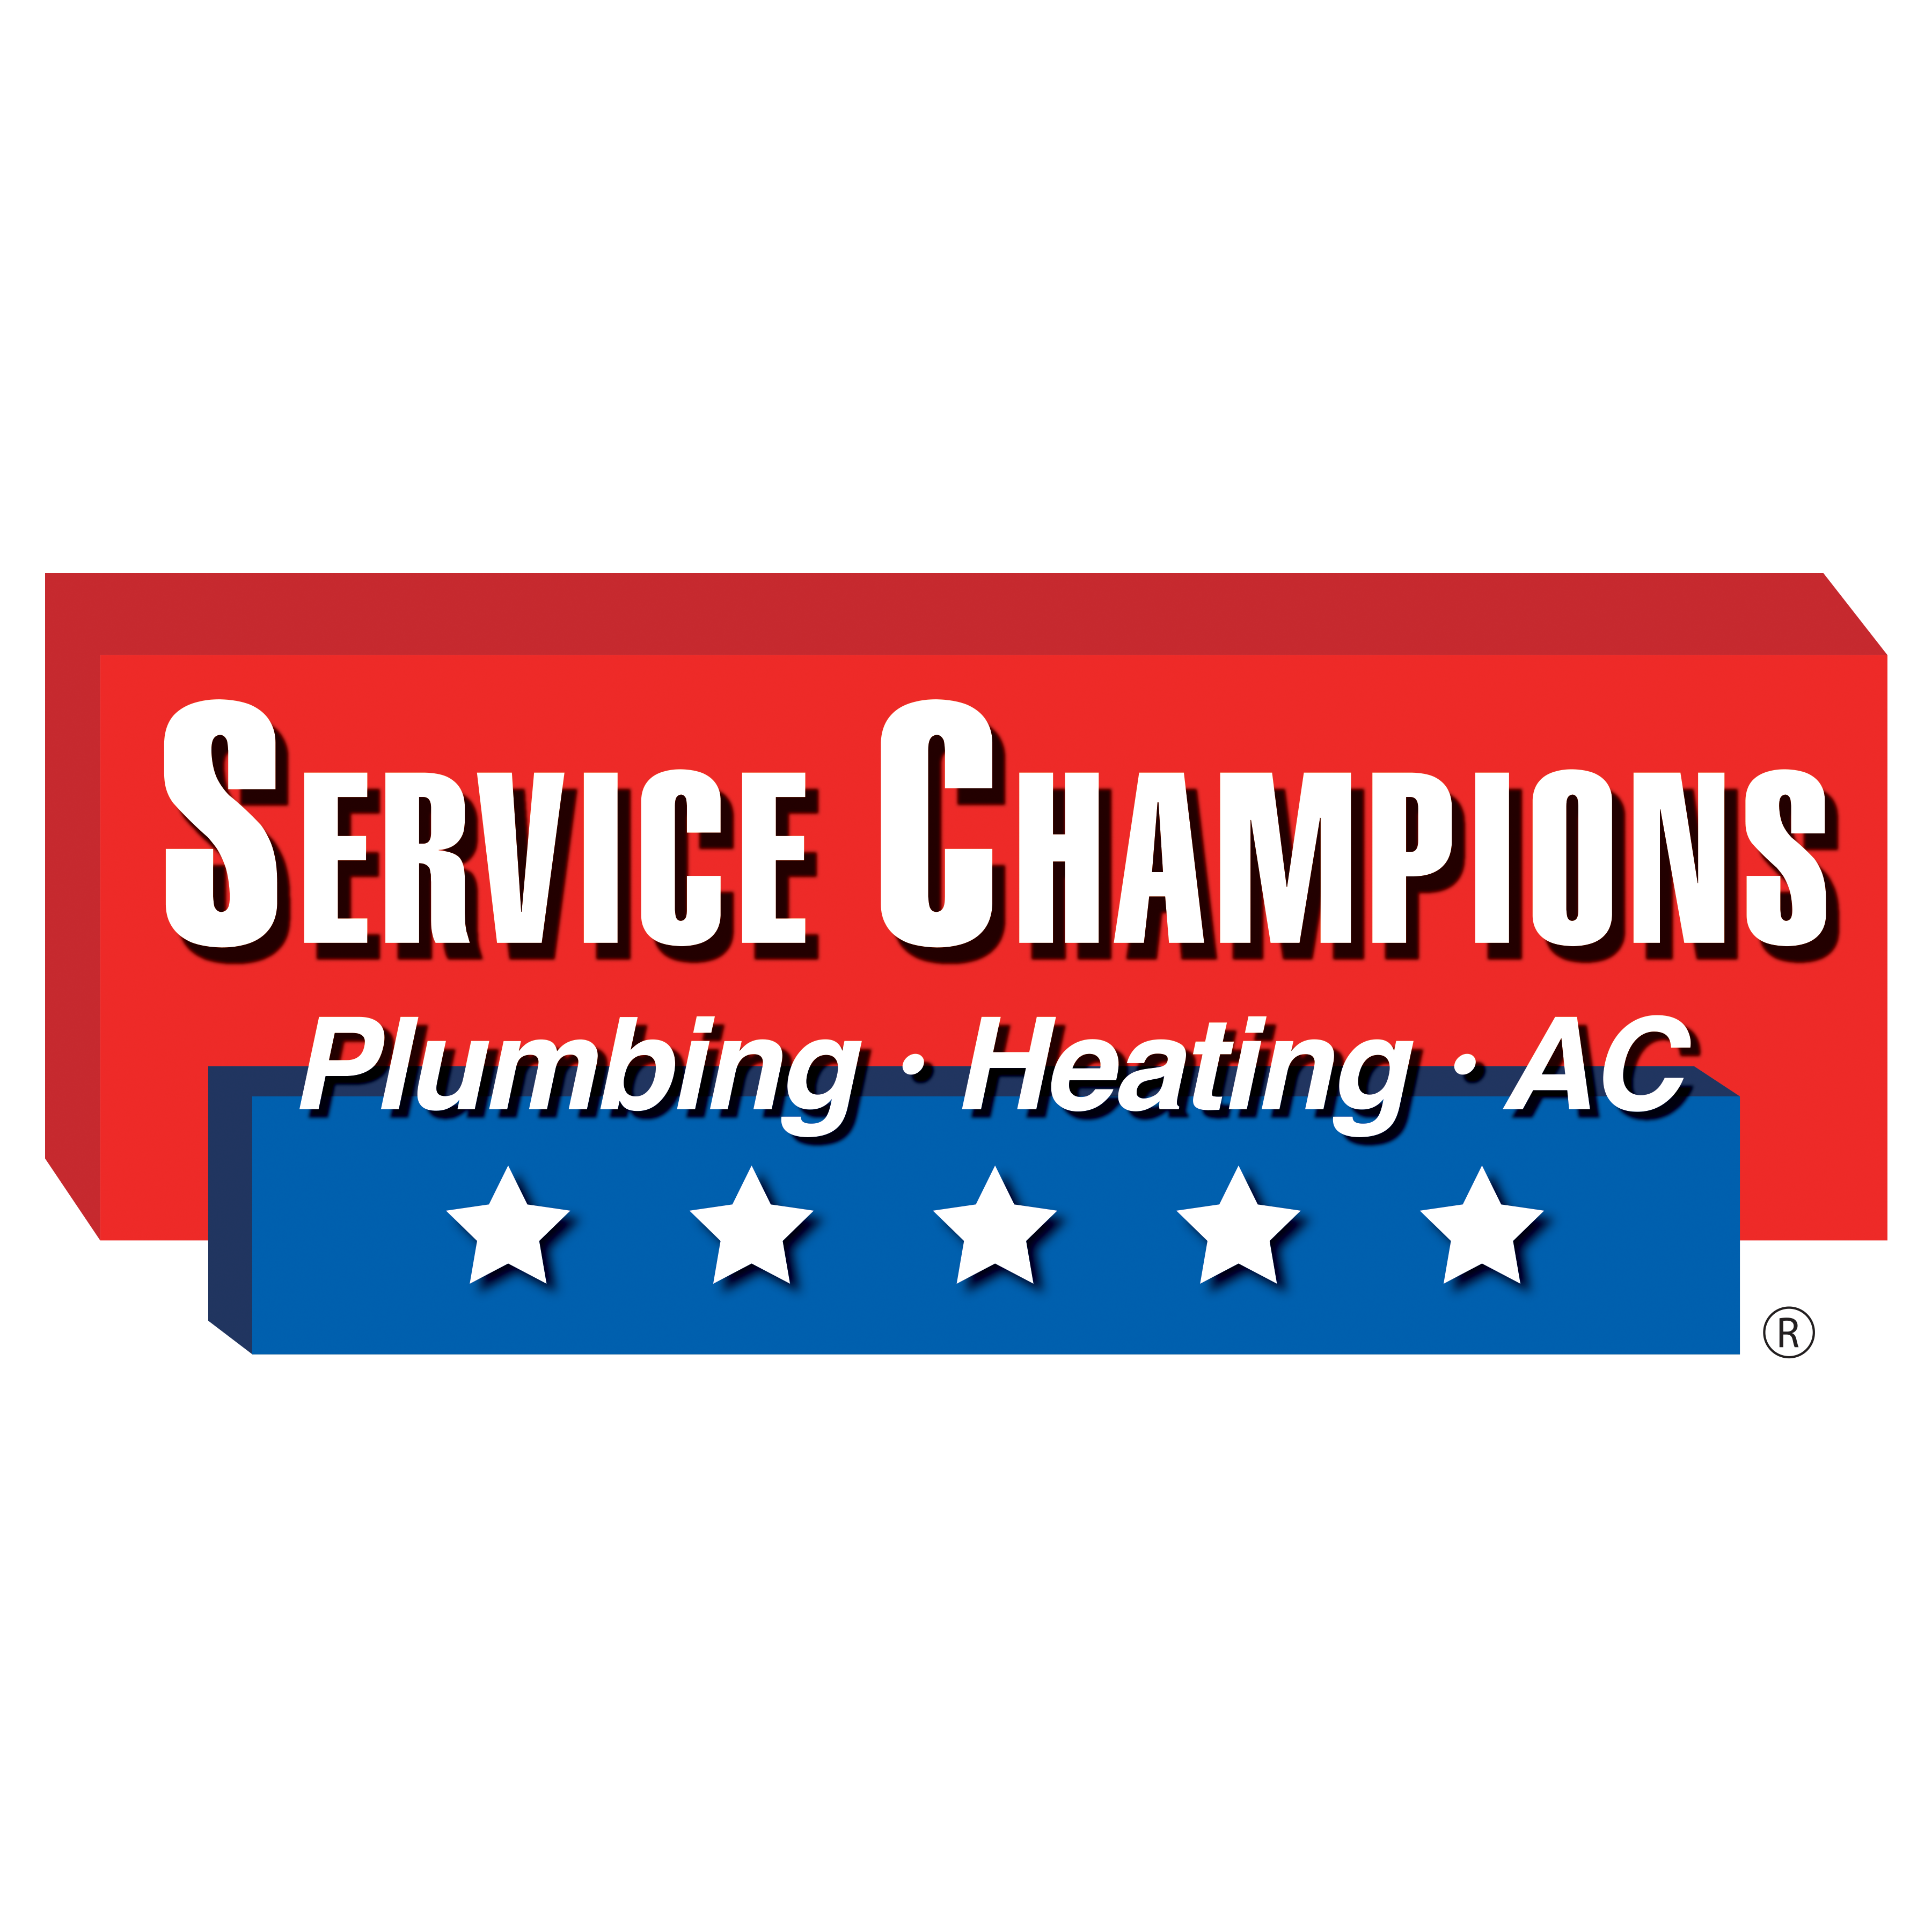 Service Champions Plumbing, Heating & AC - Colton, CA 92324 - (909)500-1240 | ShowMeLocal.com